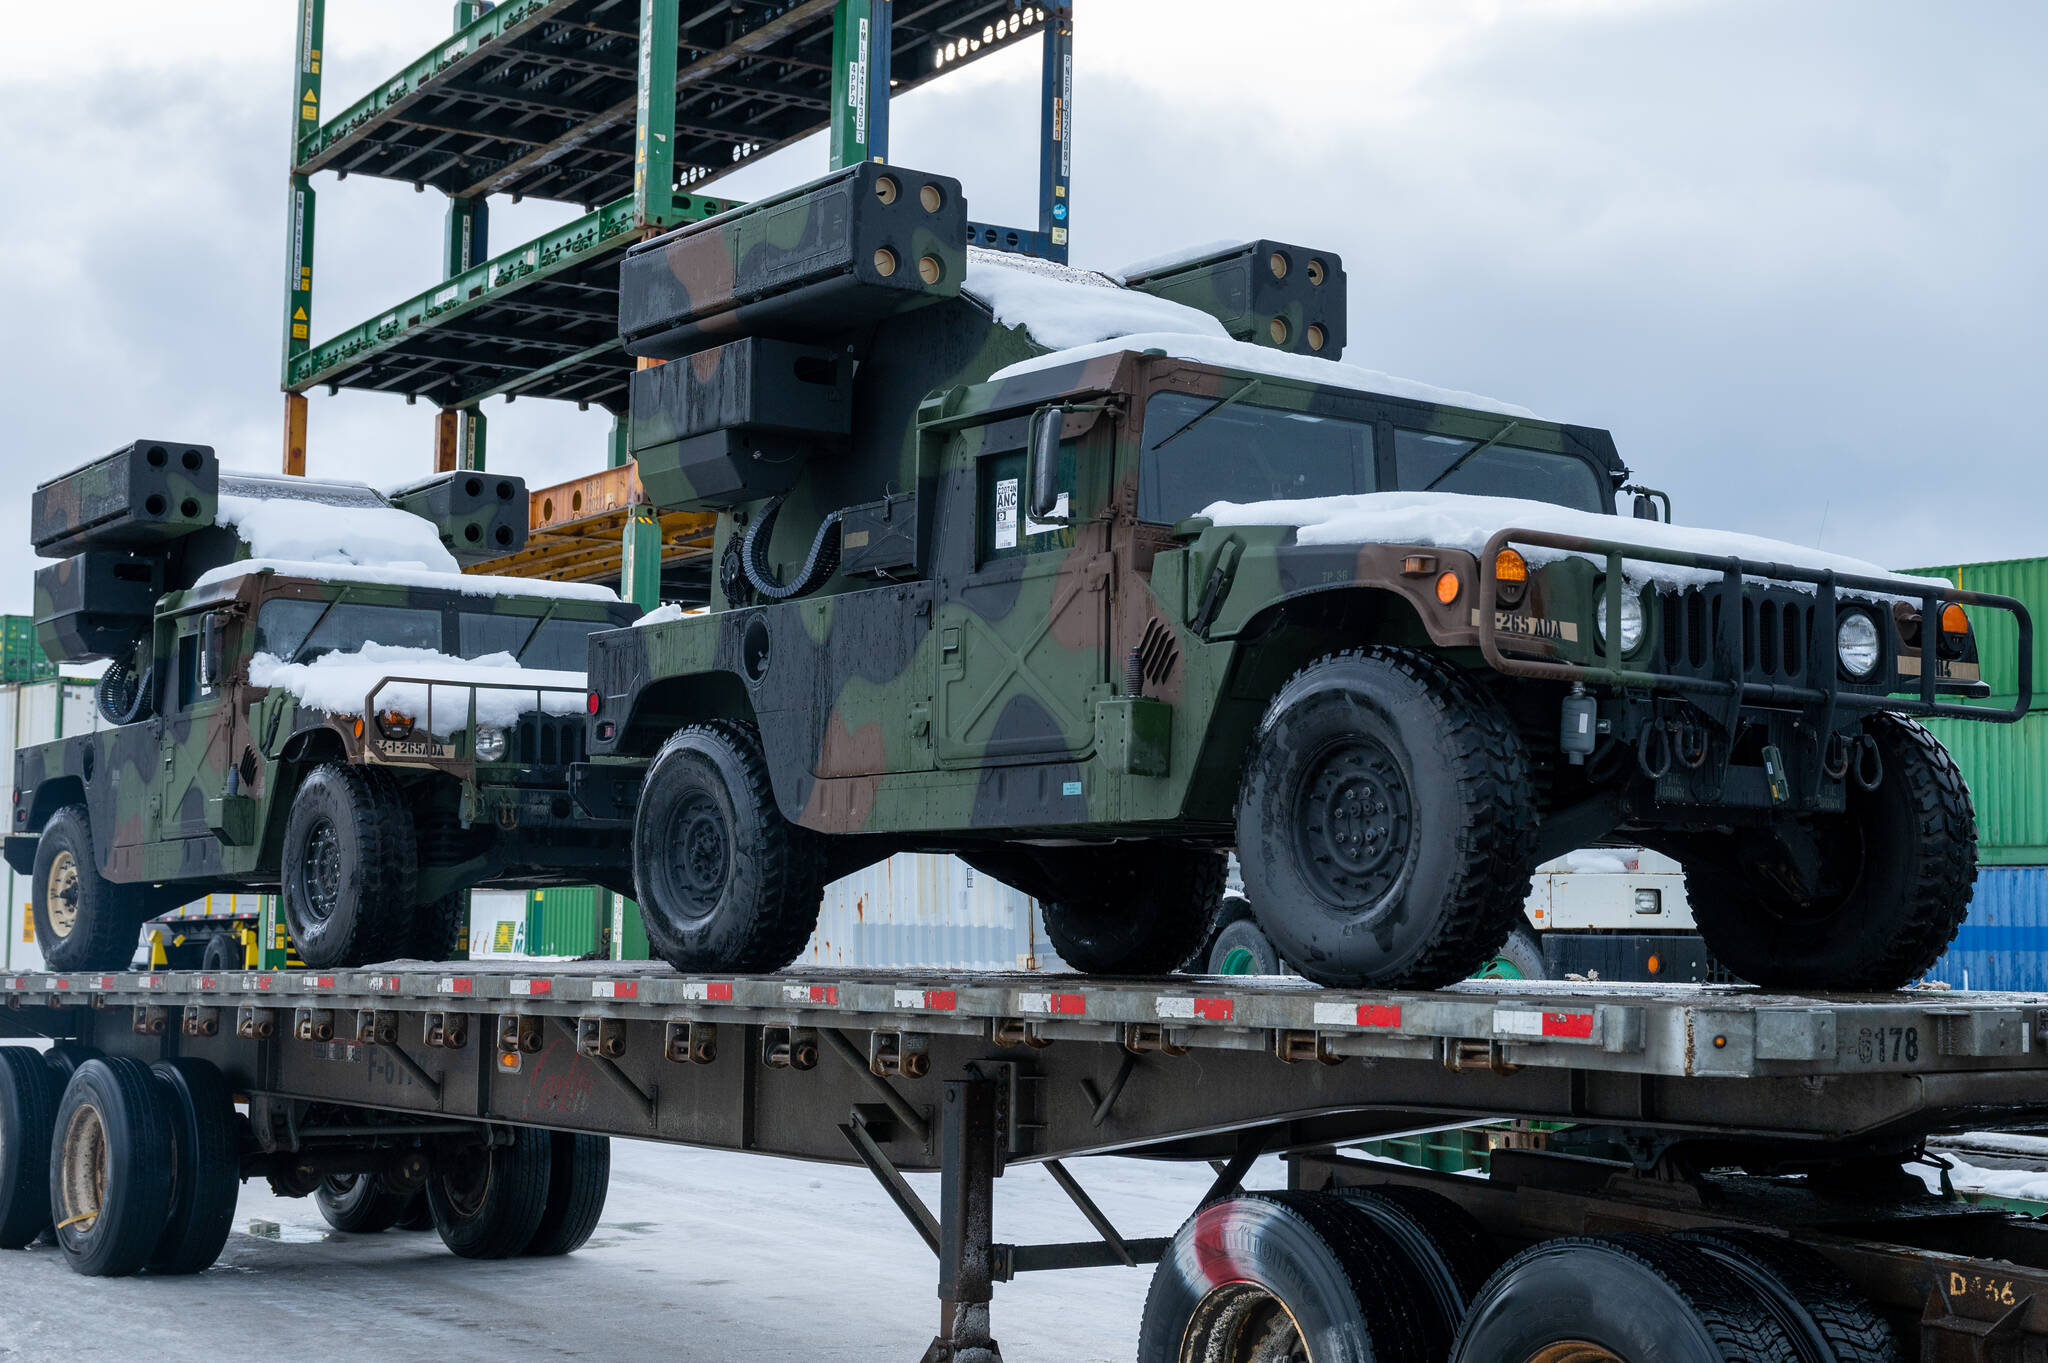 U.S. Air Force photo / Airman 1st Class Andrew Britten
Two Avenger Air Defense Systems sit on a flatbed trailer Feb. 25 at the Port of Anchorage for exercise Arctic Edge 2022.